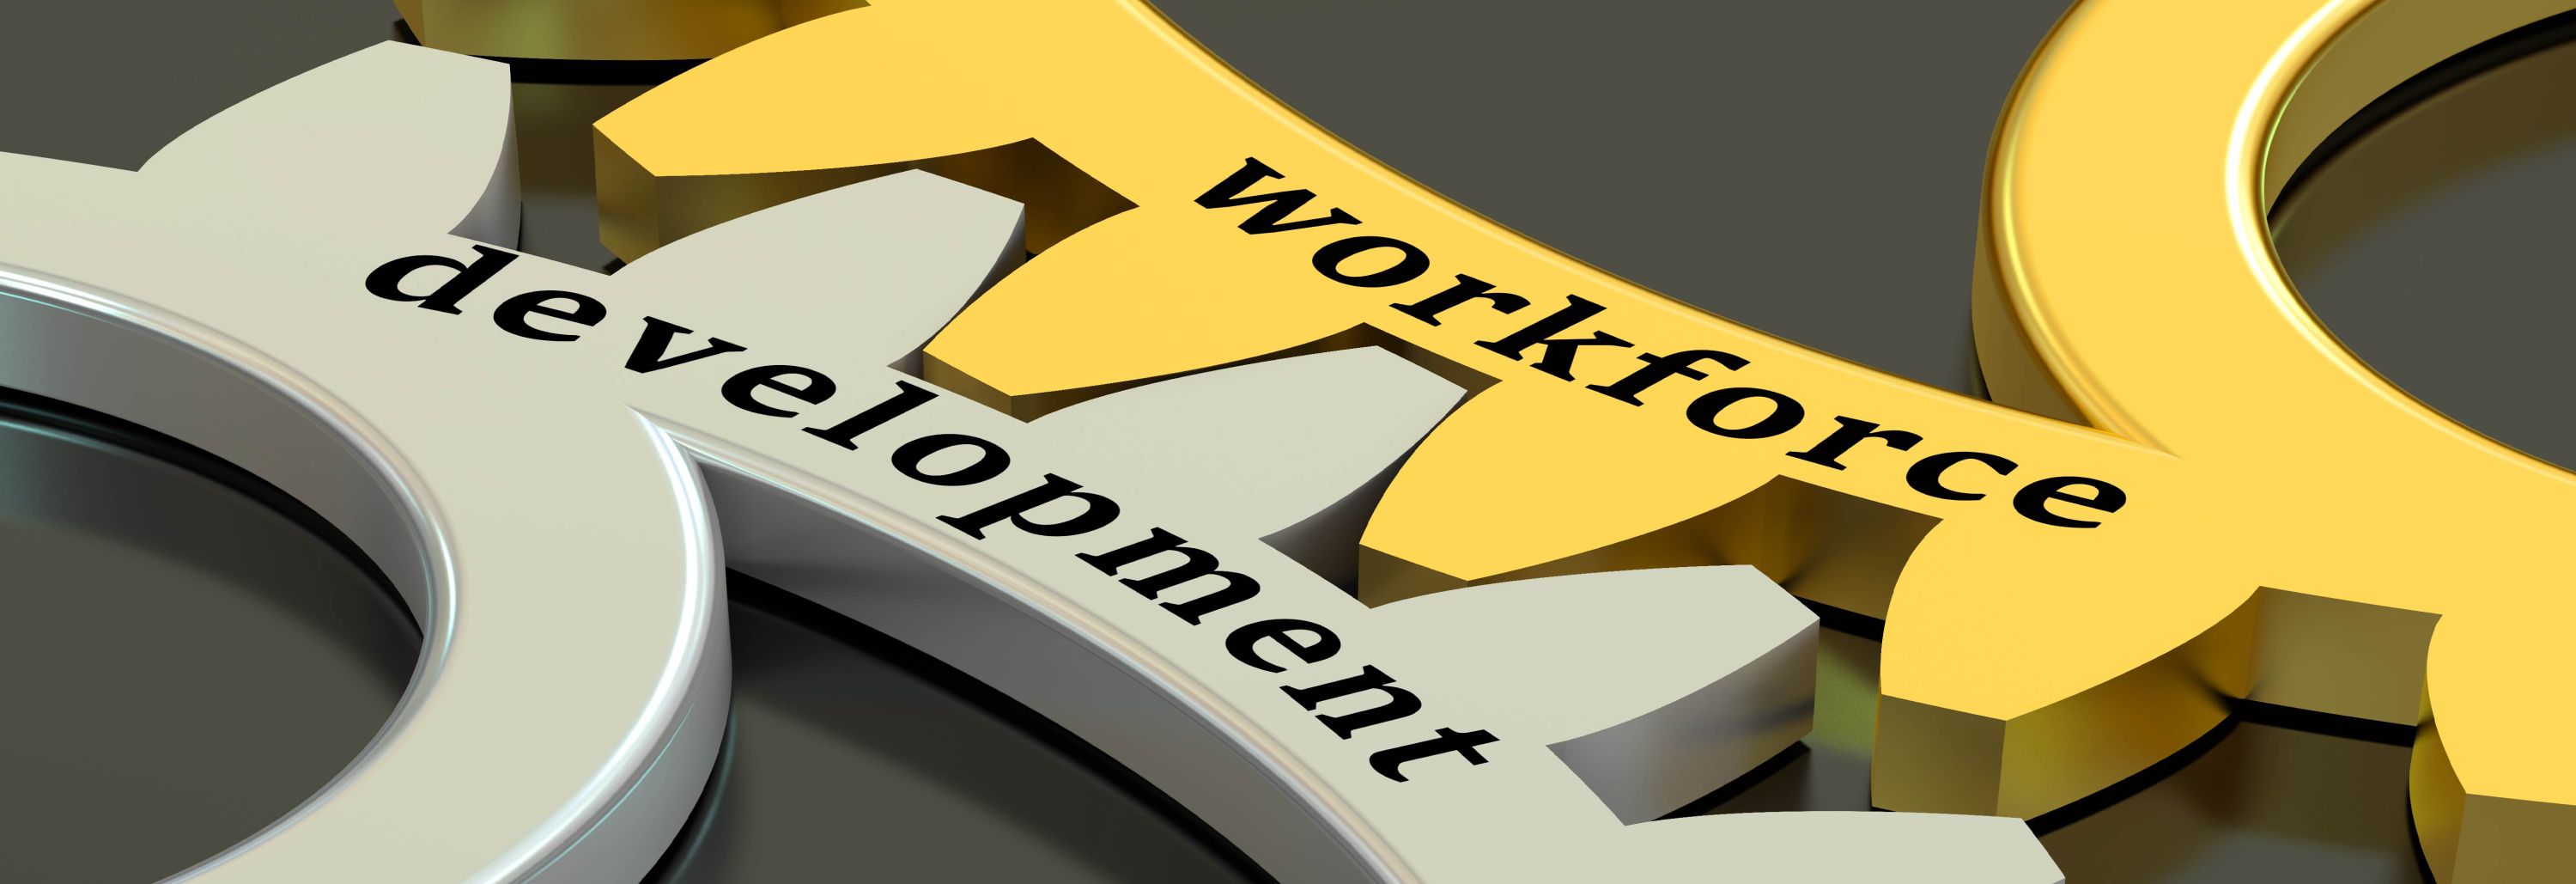 Click to open Carlsbad Workforce Data